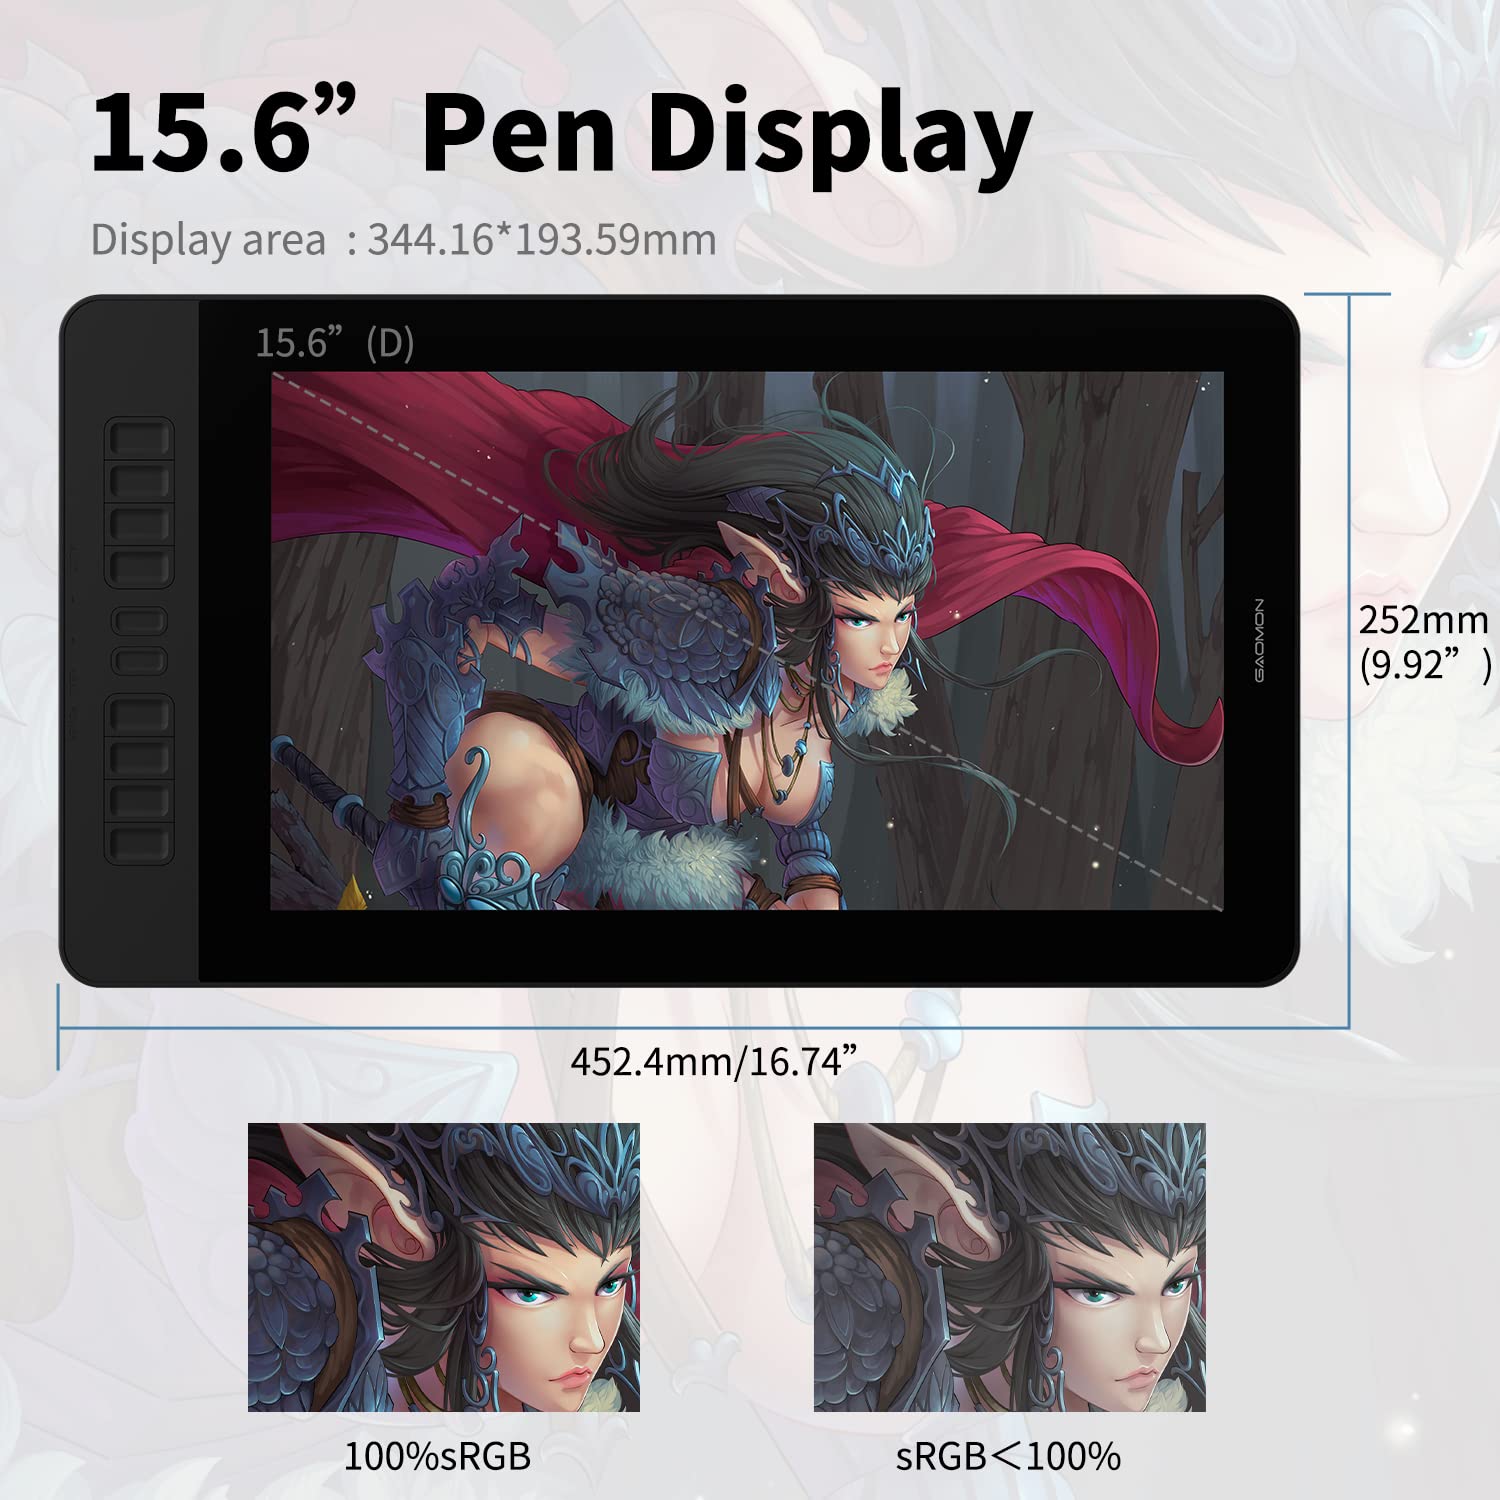 GAOMON PD1560 15.6 Inches 8192 Levels Pen Display with Arm Stand 1920 x 1080 HD IPS Screen Drawing Tablet with 10 Shortcut Keys Black